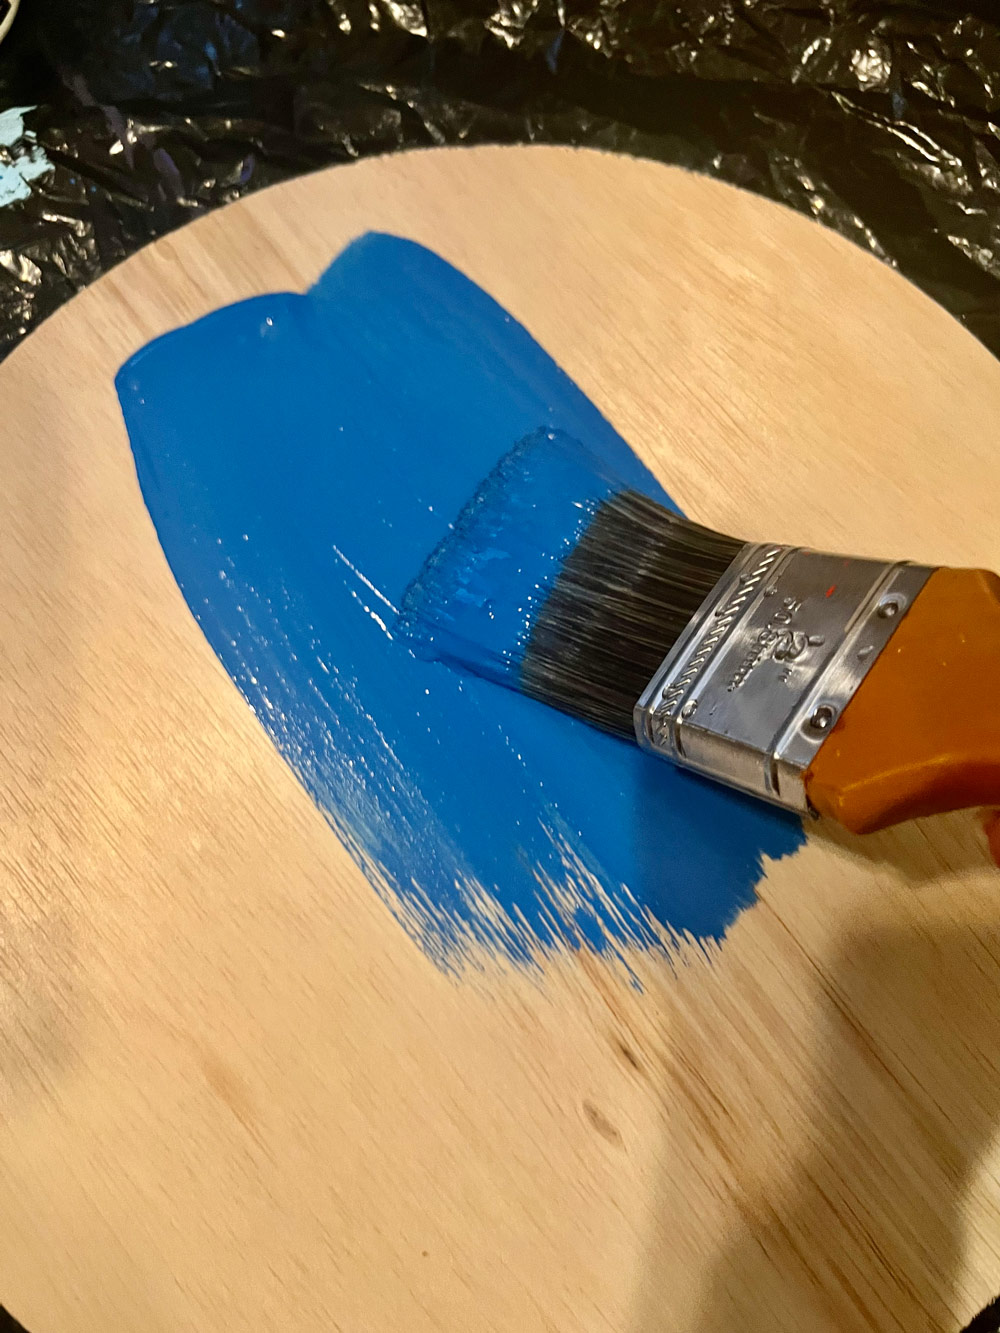 A wooden circle being painted blue with a paintbrush.